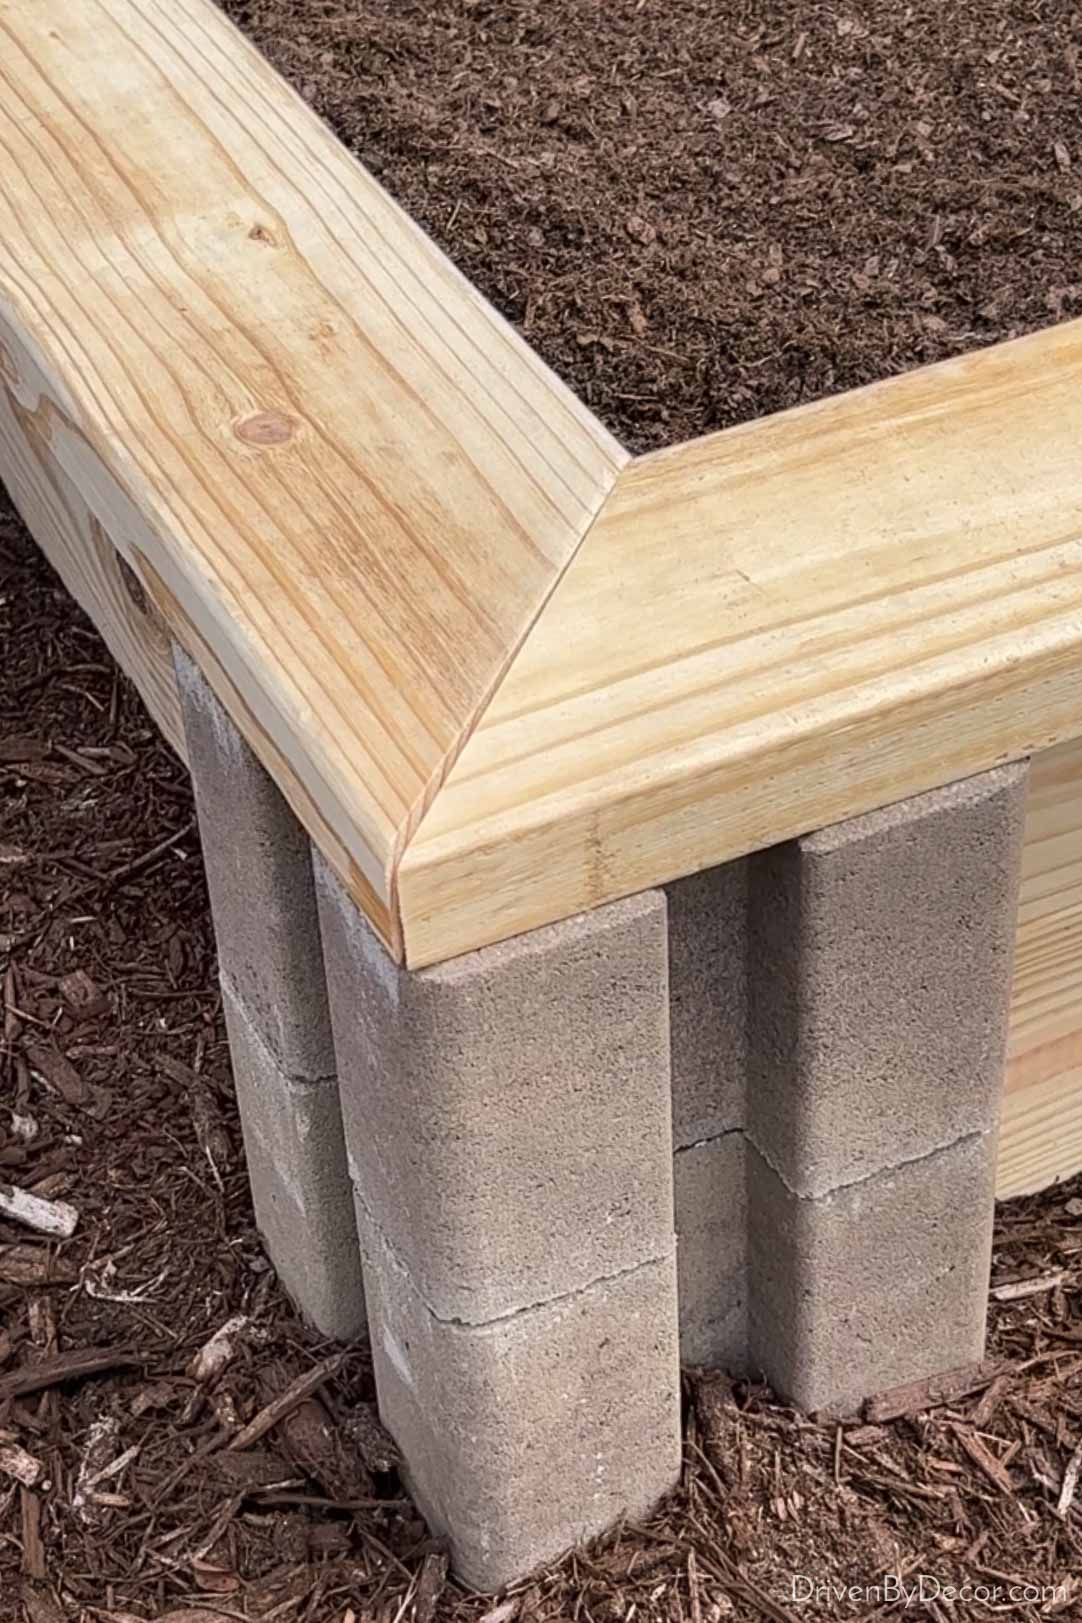 Mitered wood corners on top of raised garden bed